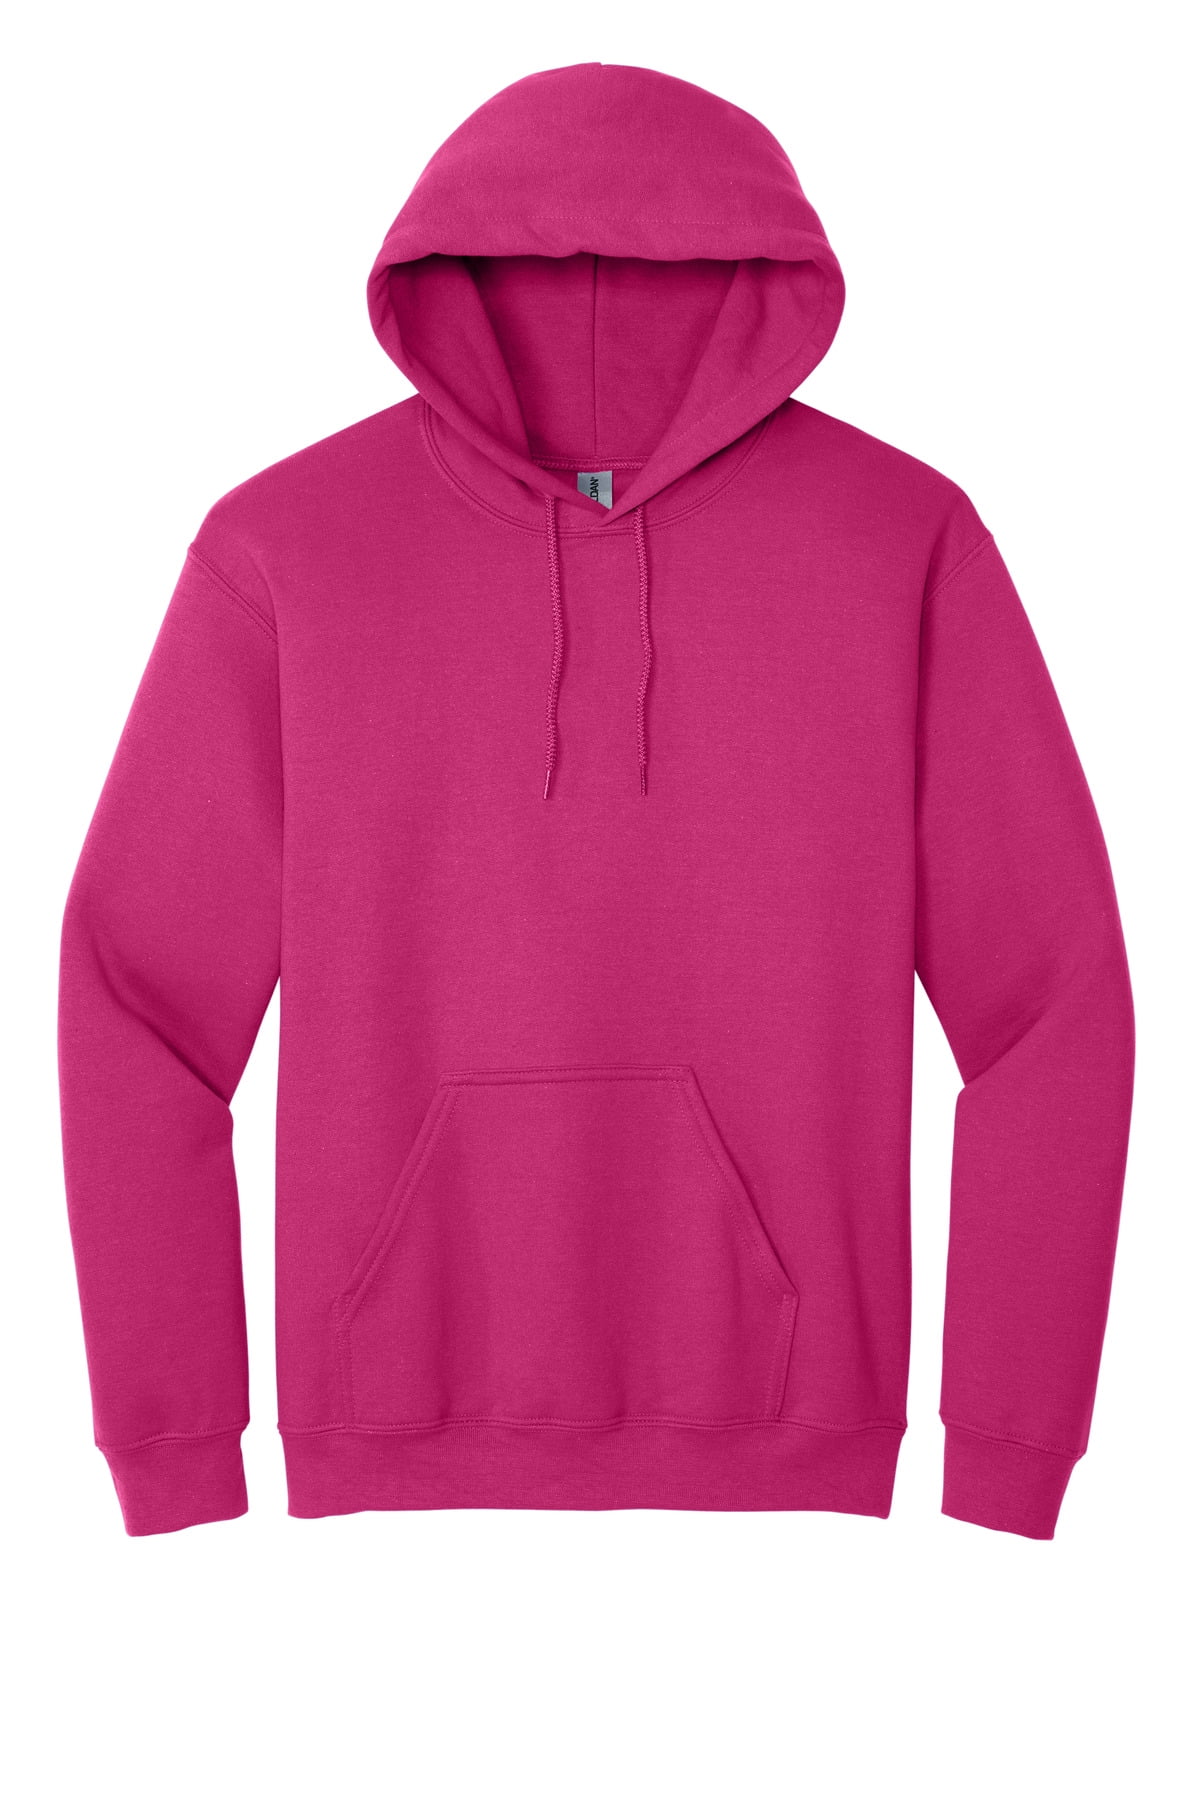 Normal is Boring - Women's Plus Sweatshirts and Hoodies, up to Size - National Park Acadia - Walmart.com